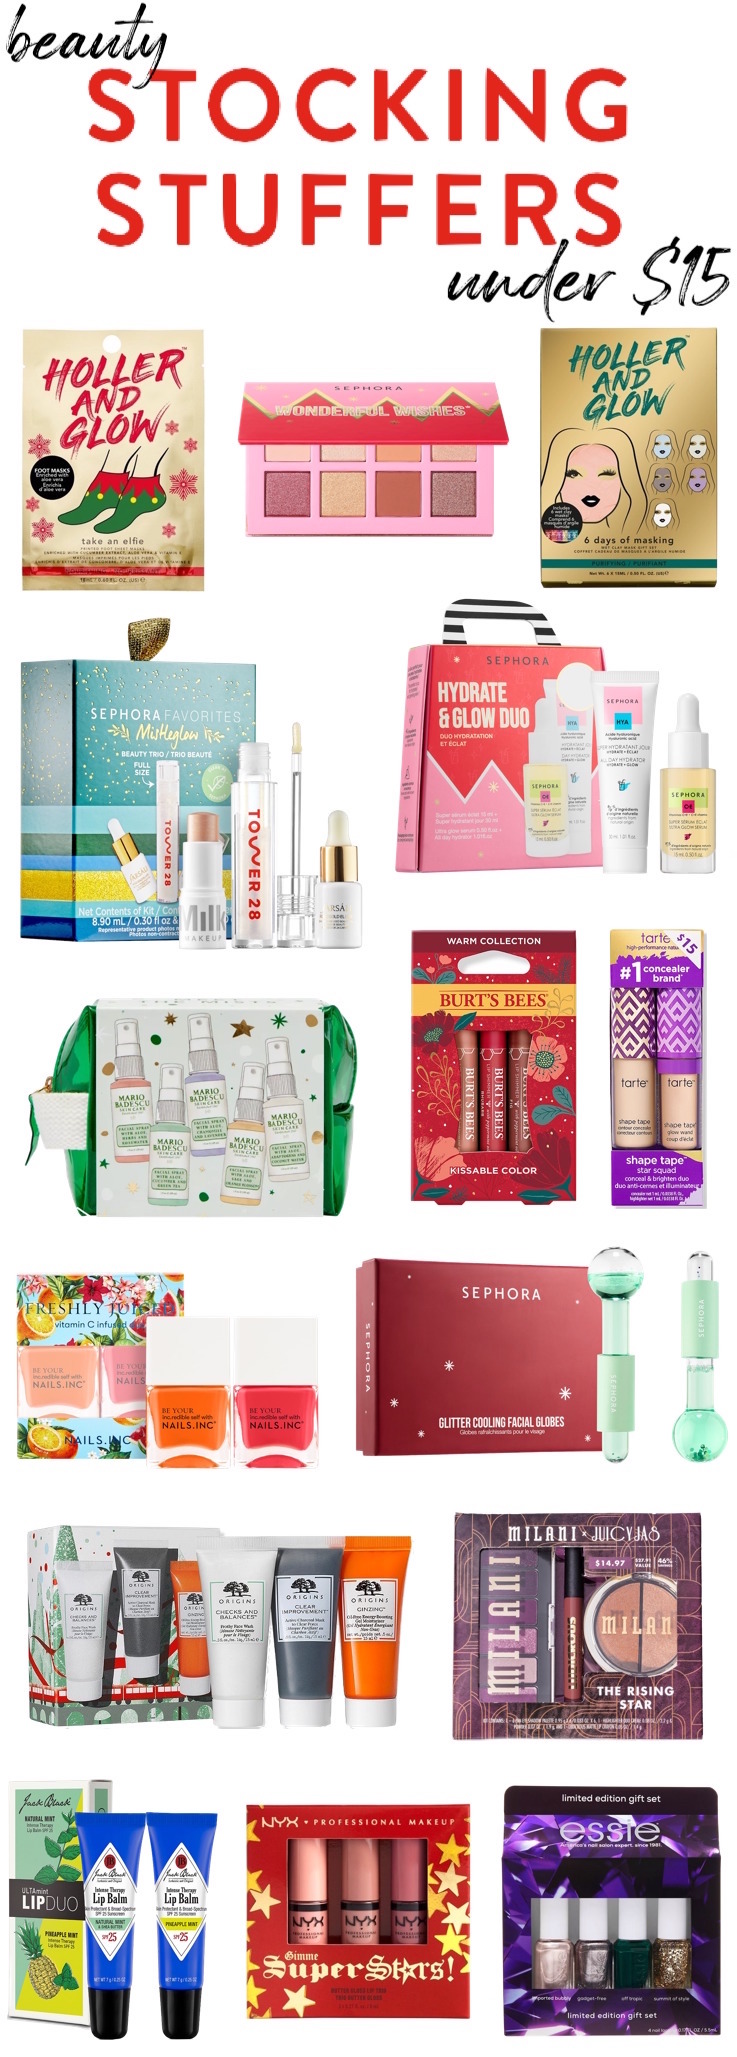 Small gifts, big smiles! These self-care and beauty stocking stuffers under $15 are the perfect size & price and pack a big punch!